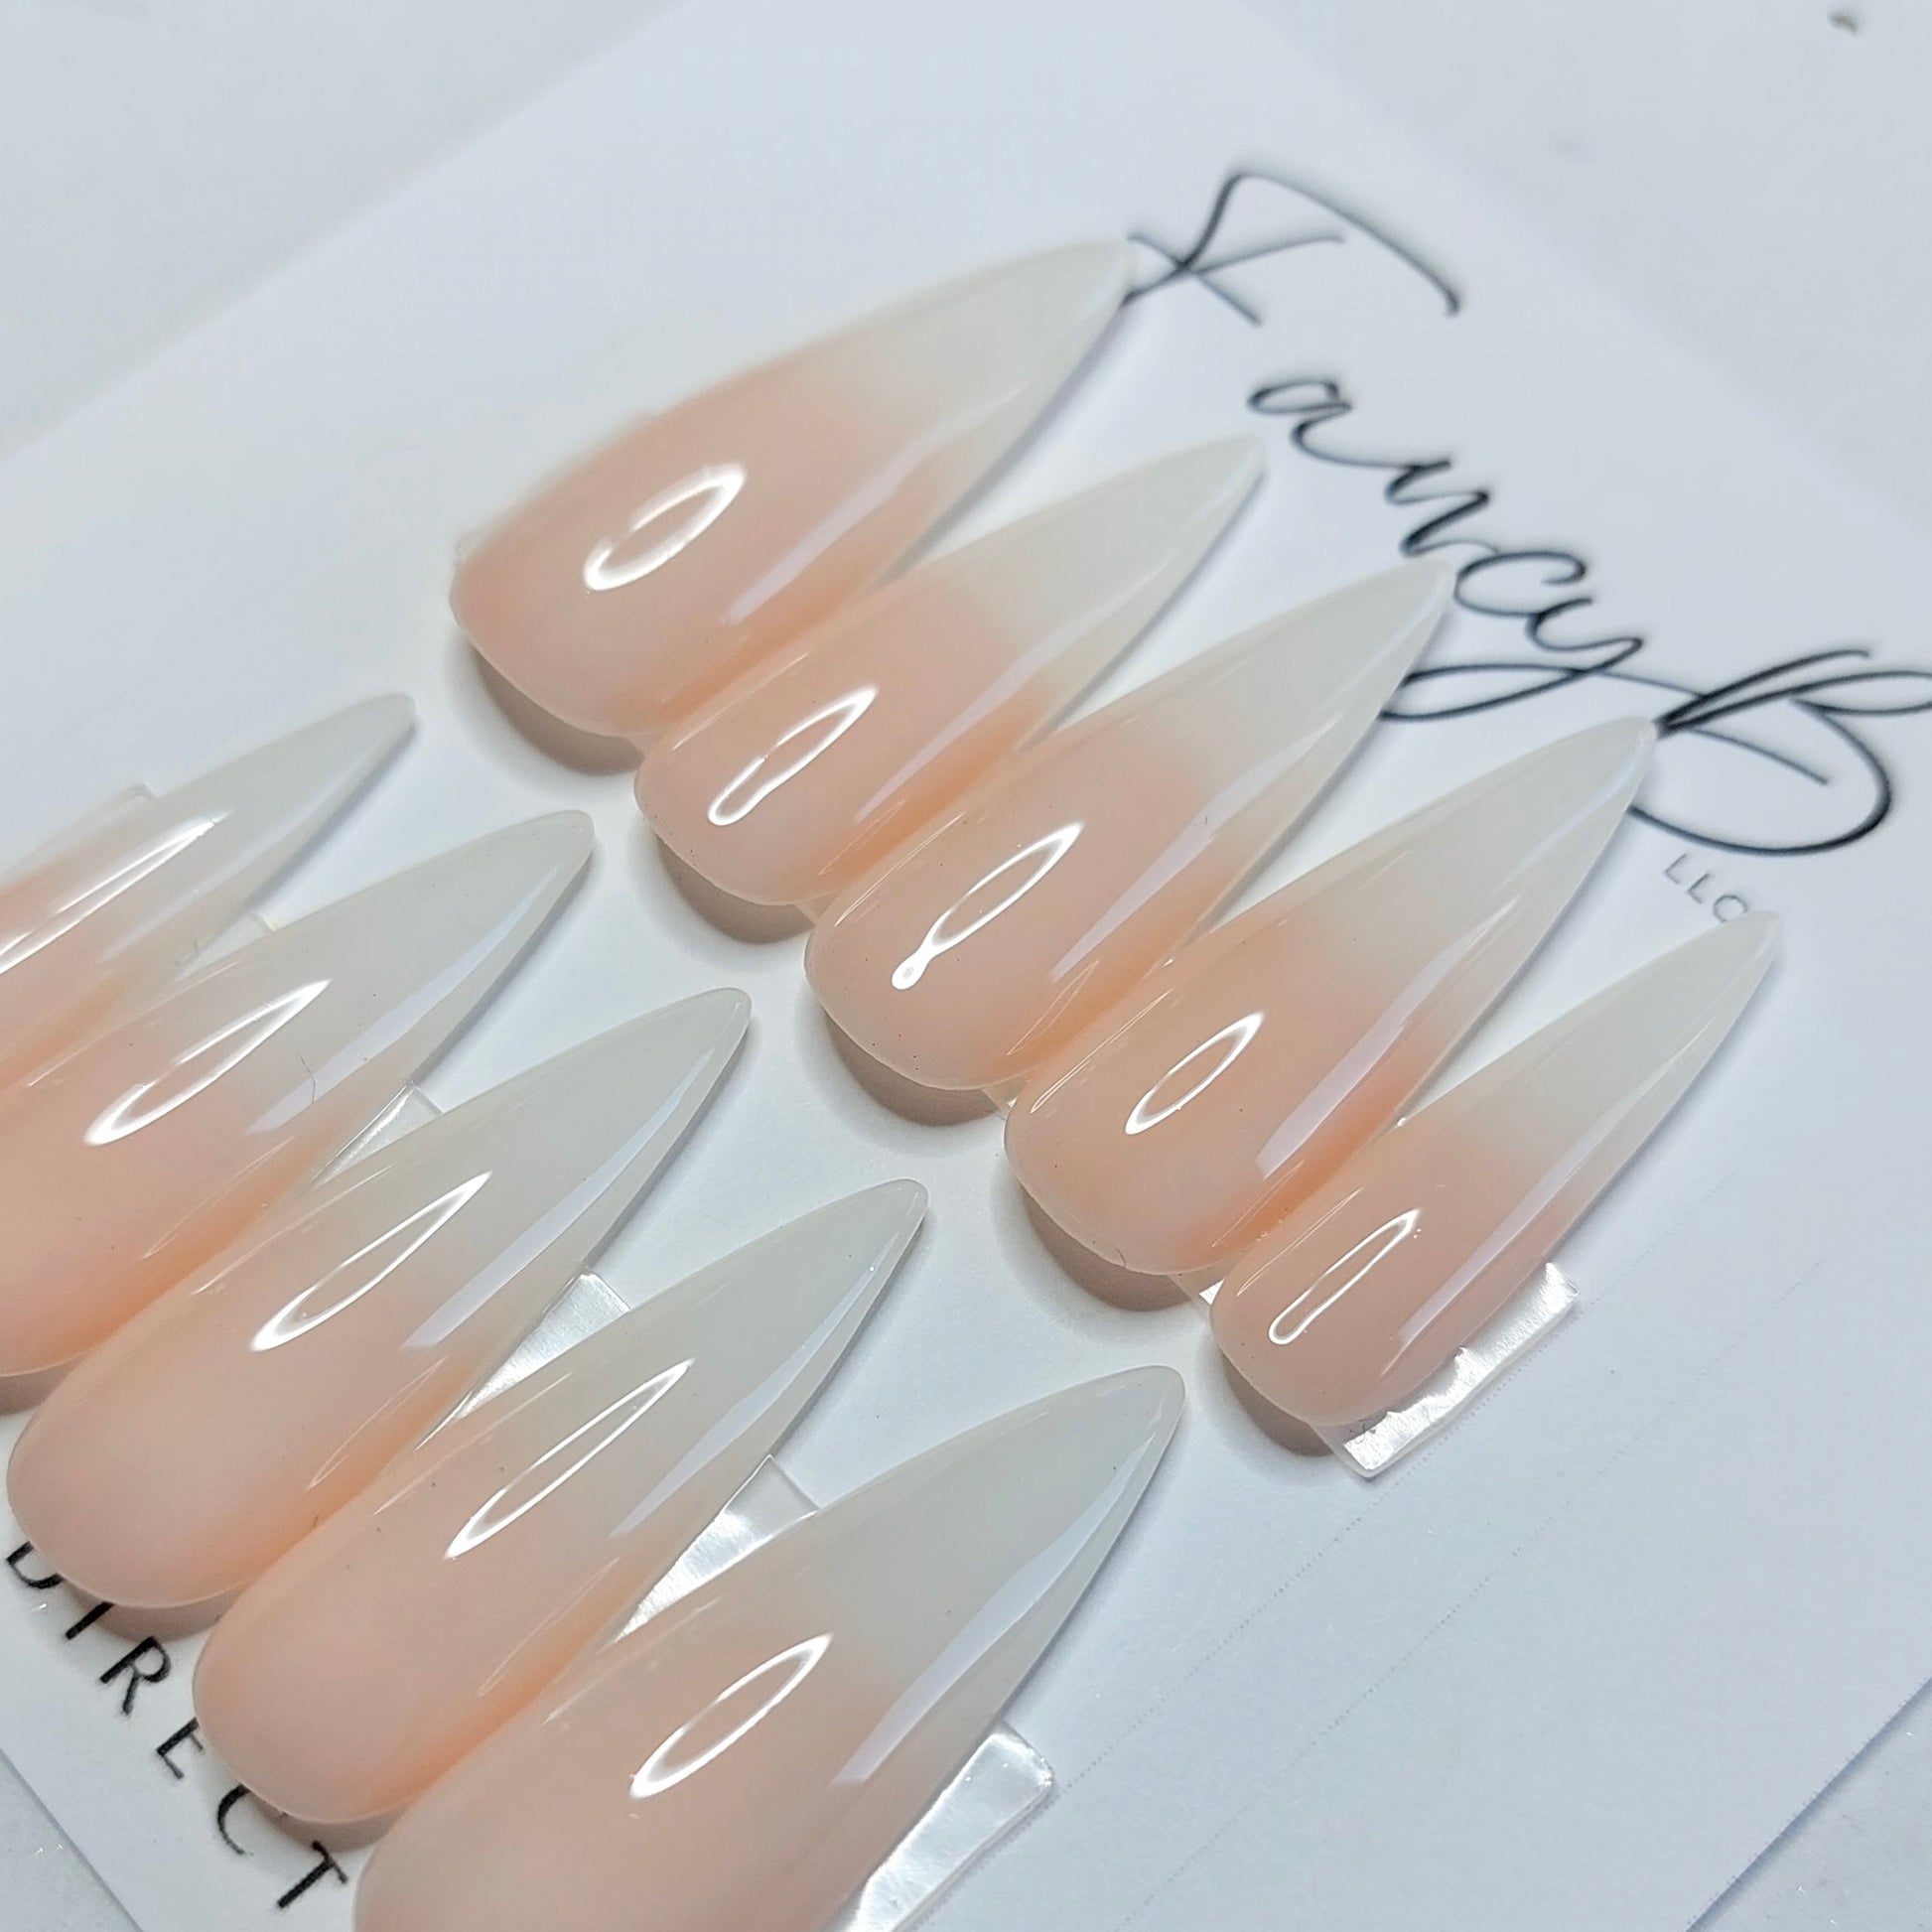 10 piece handmade luxury nail set, nude french ombre, press on nails. sharp long stiletto